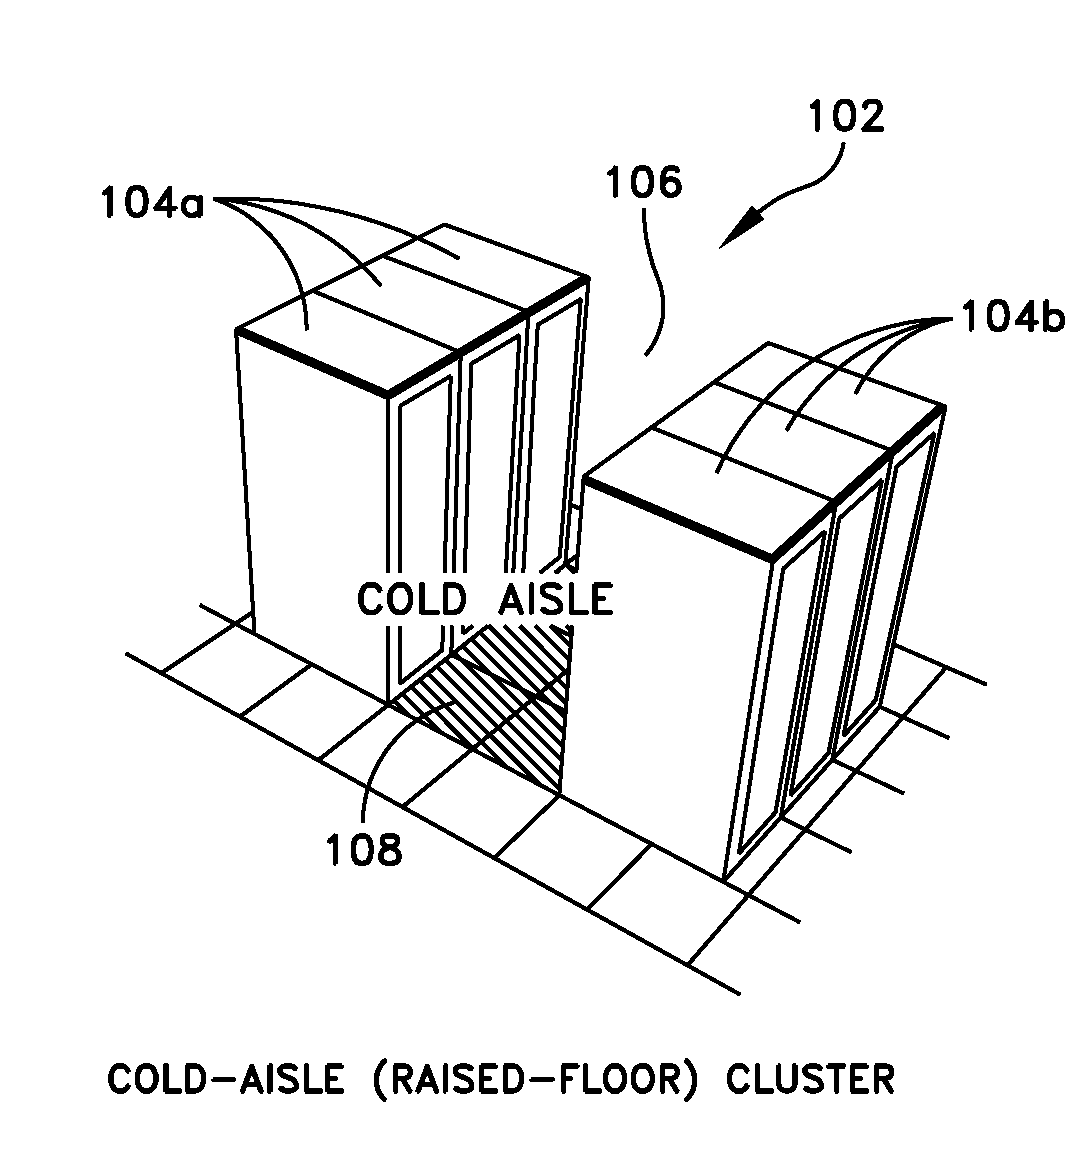 System and method for evaluating equipment rack cooling performance